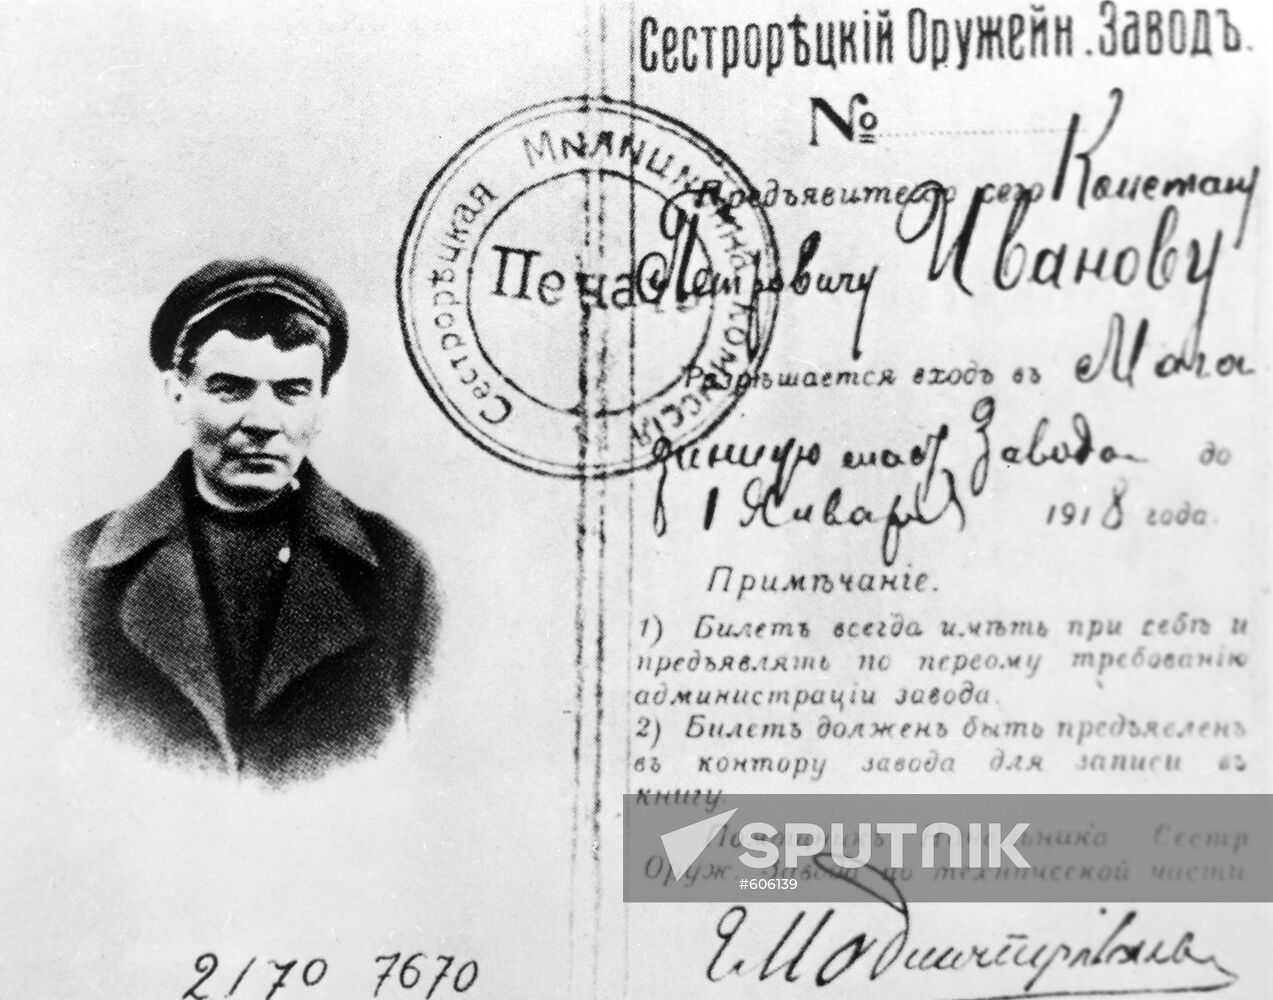 Factory worker's identity card used by V. Lenin